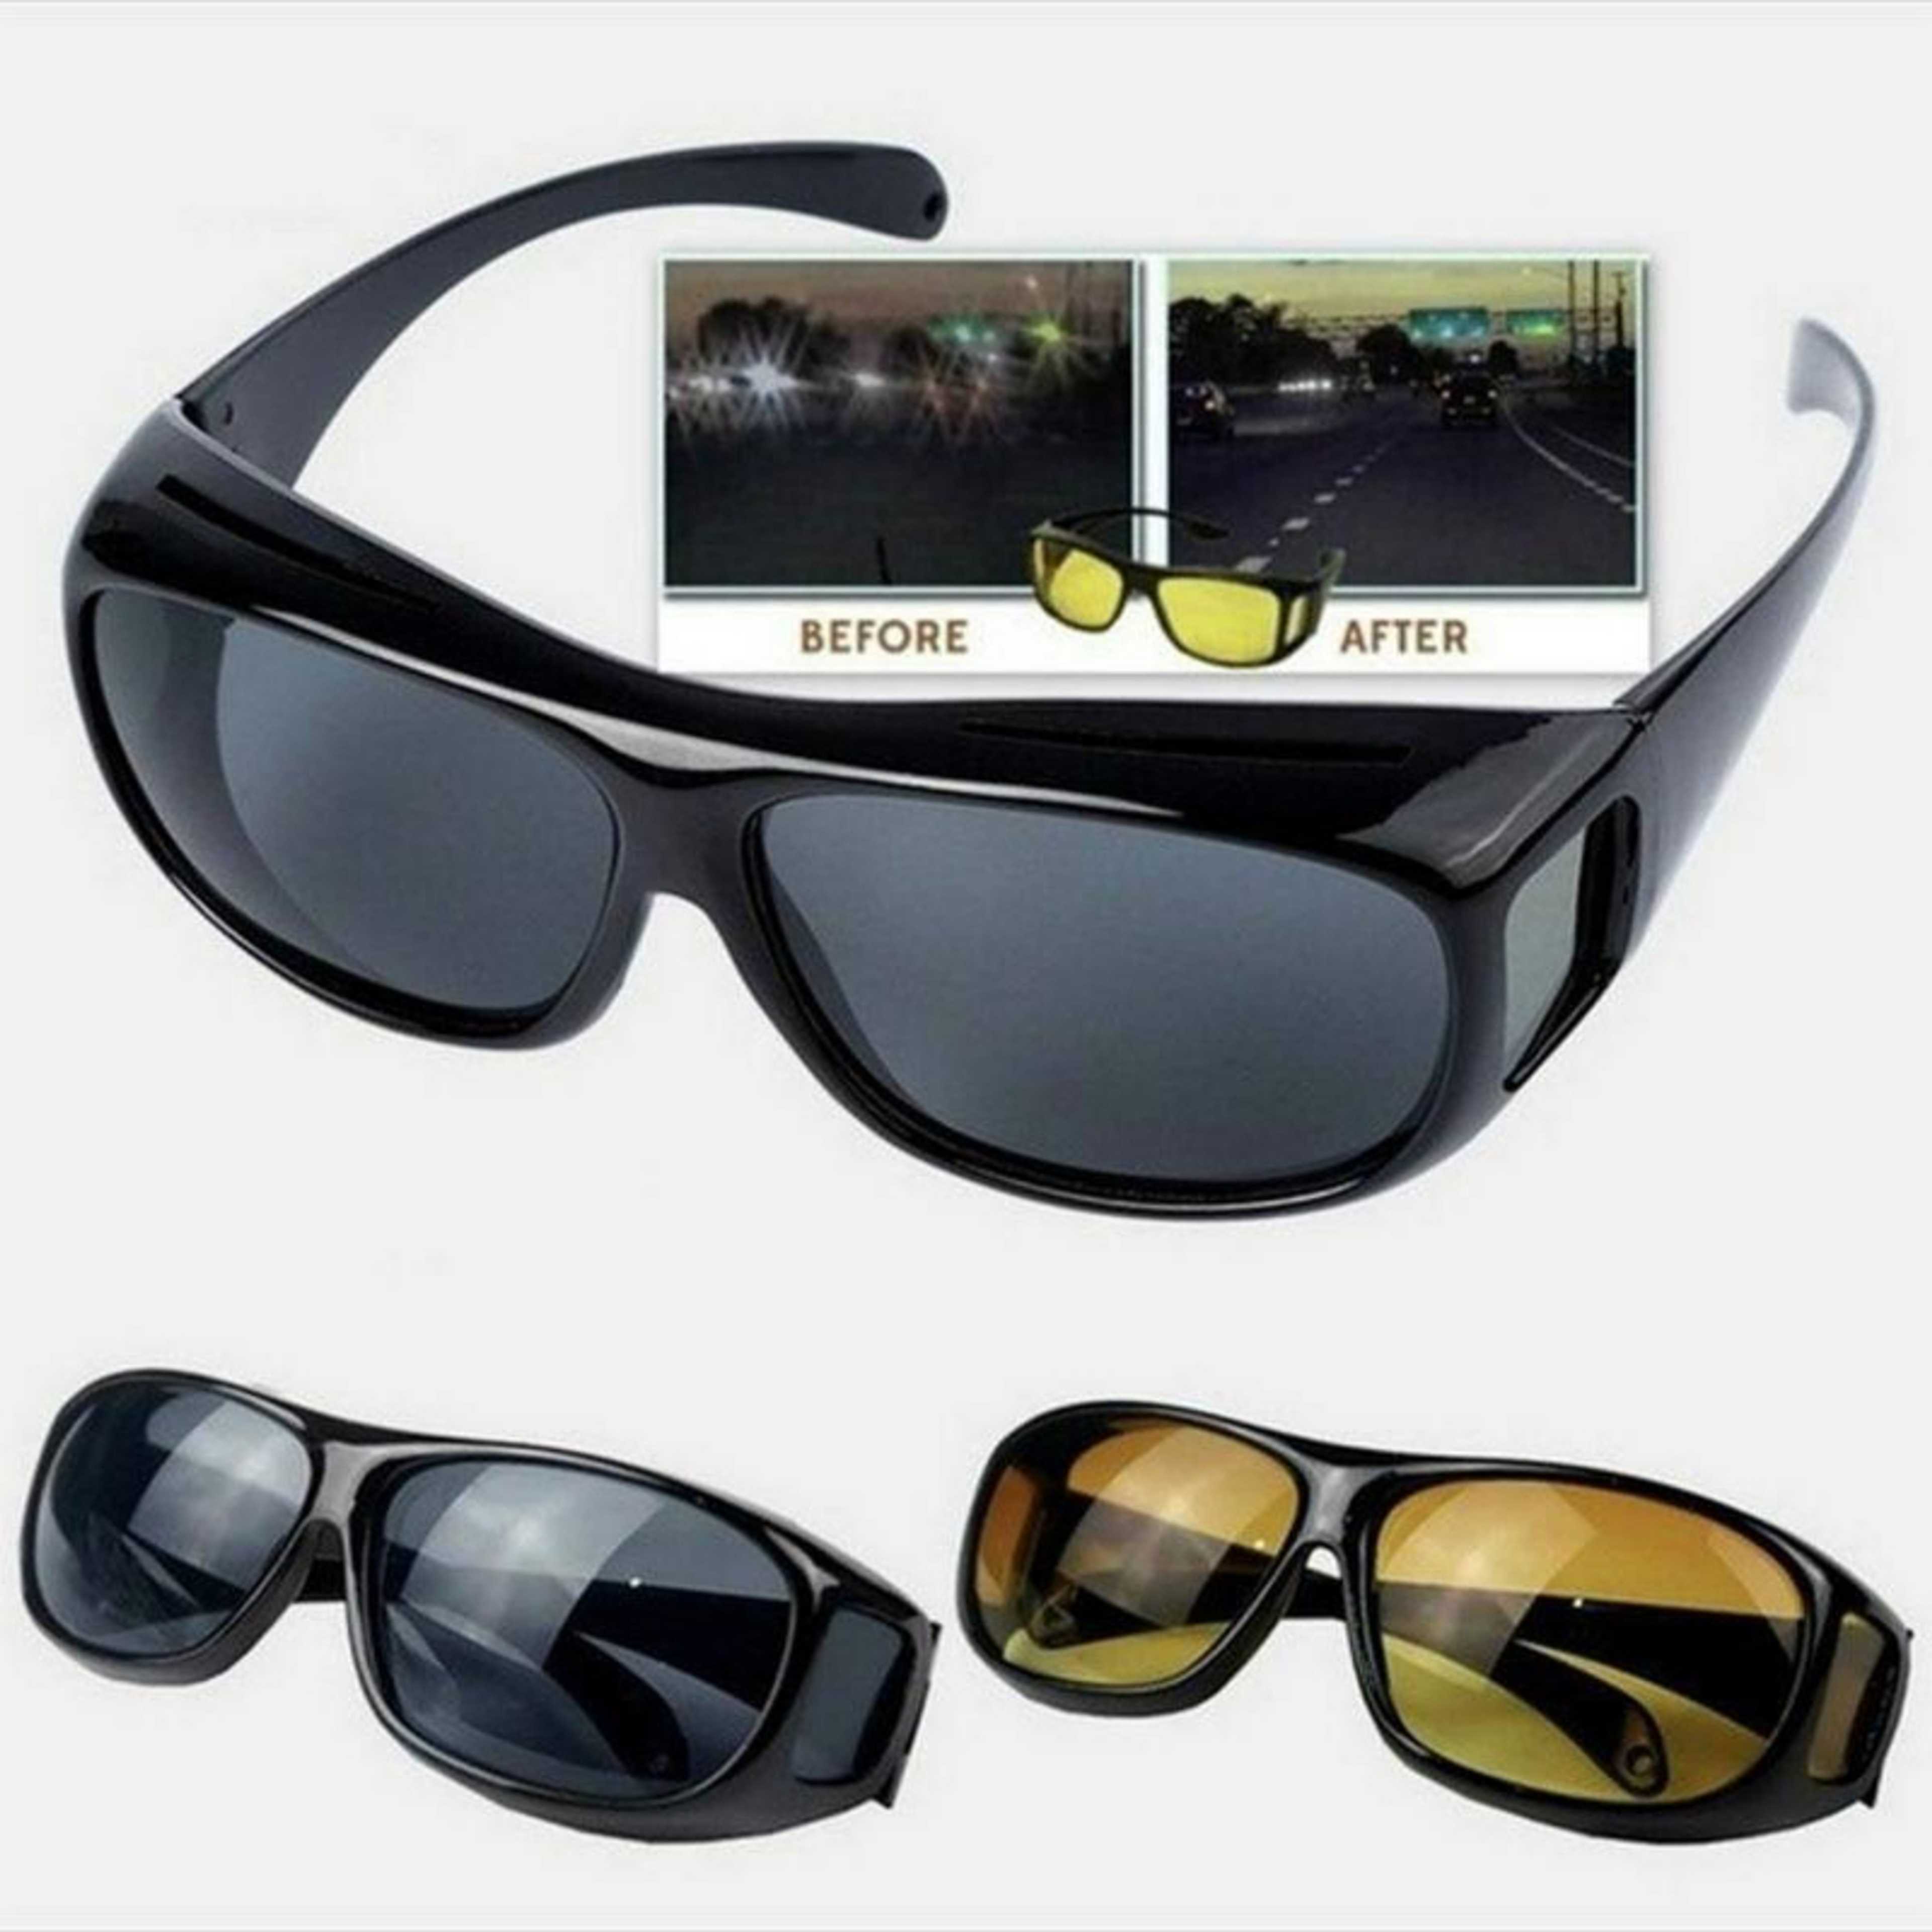 Pack Of 2 HD Night Vision Glasses for Night Driving Protective Eyewear Anti Glare and Sunglasses